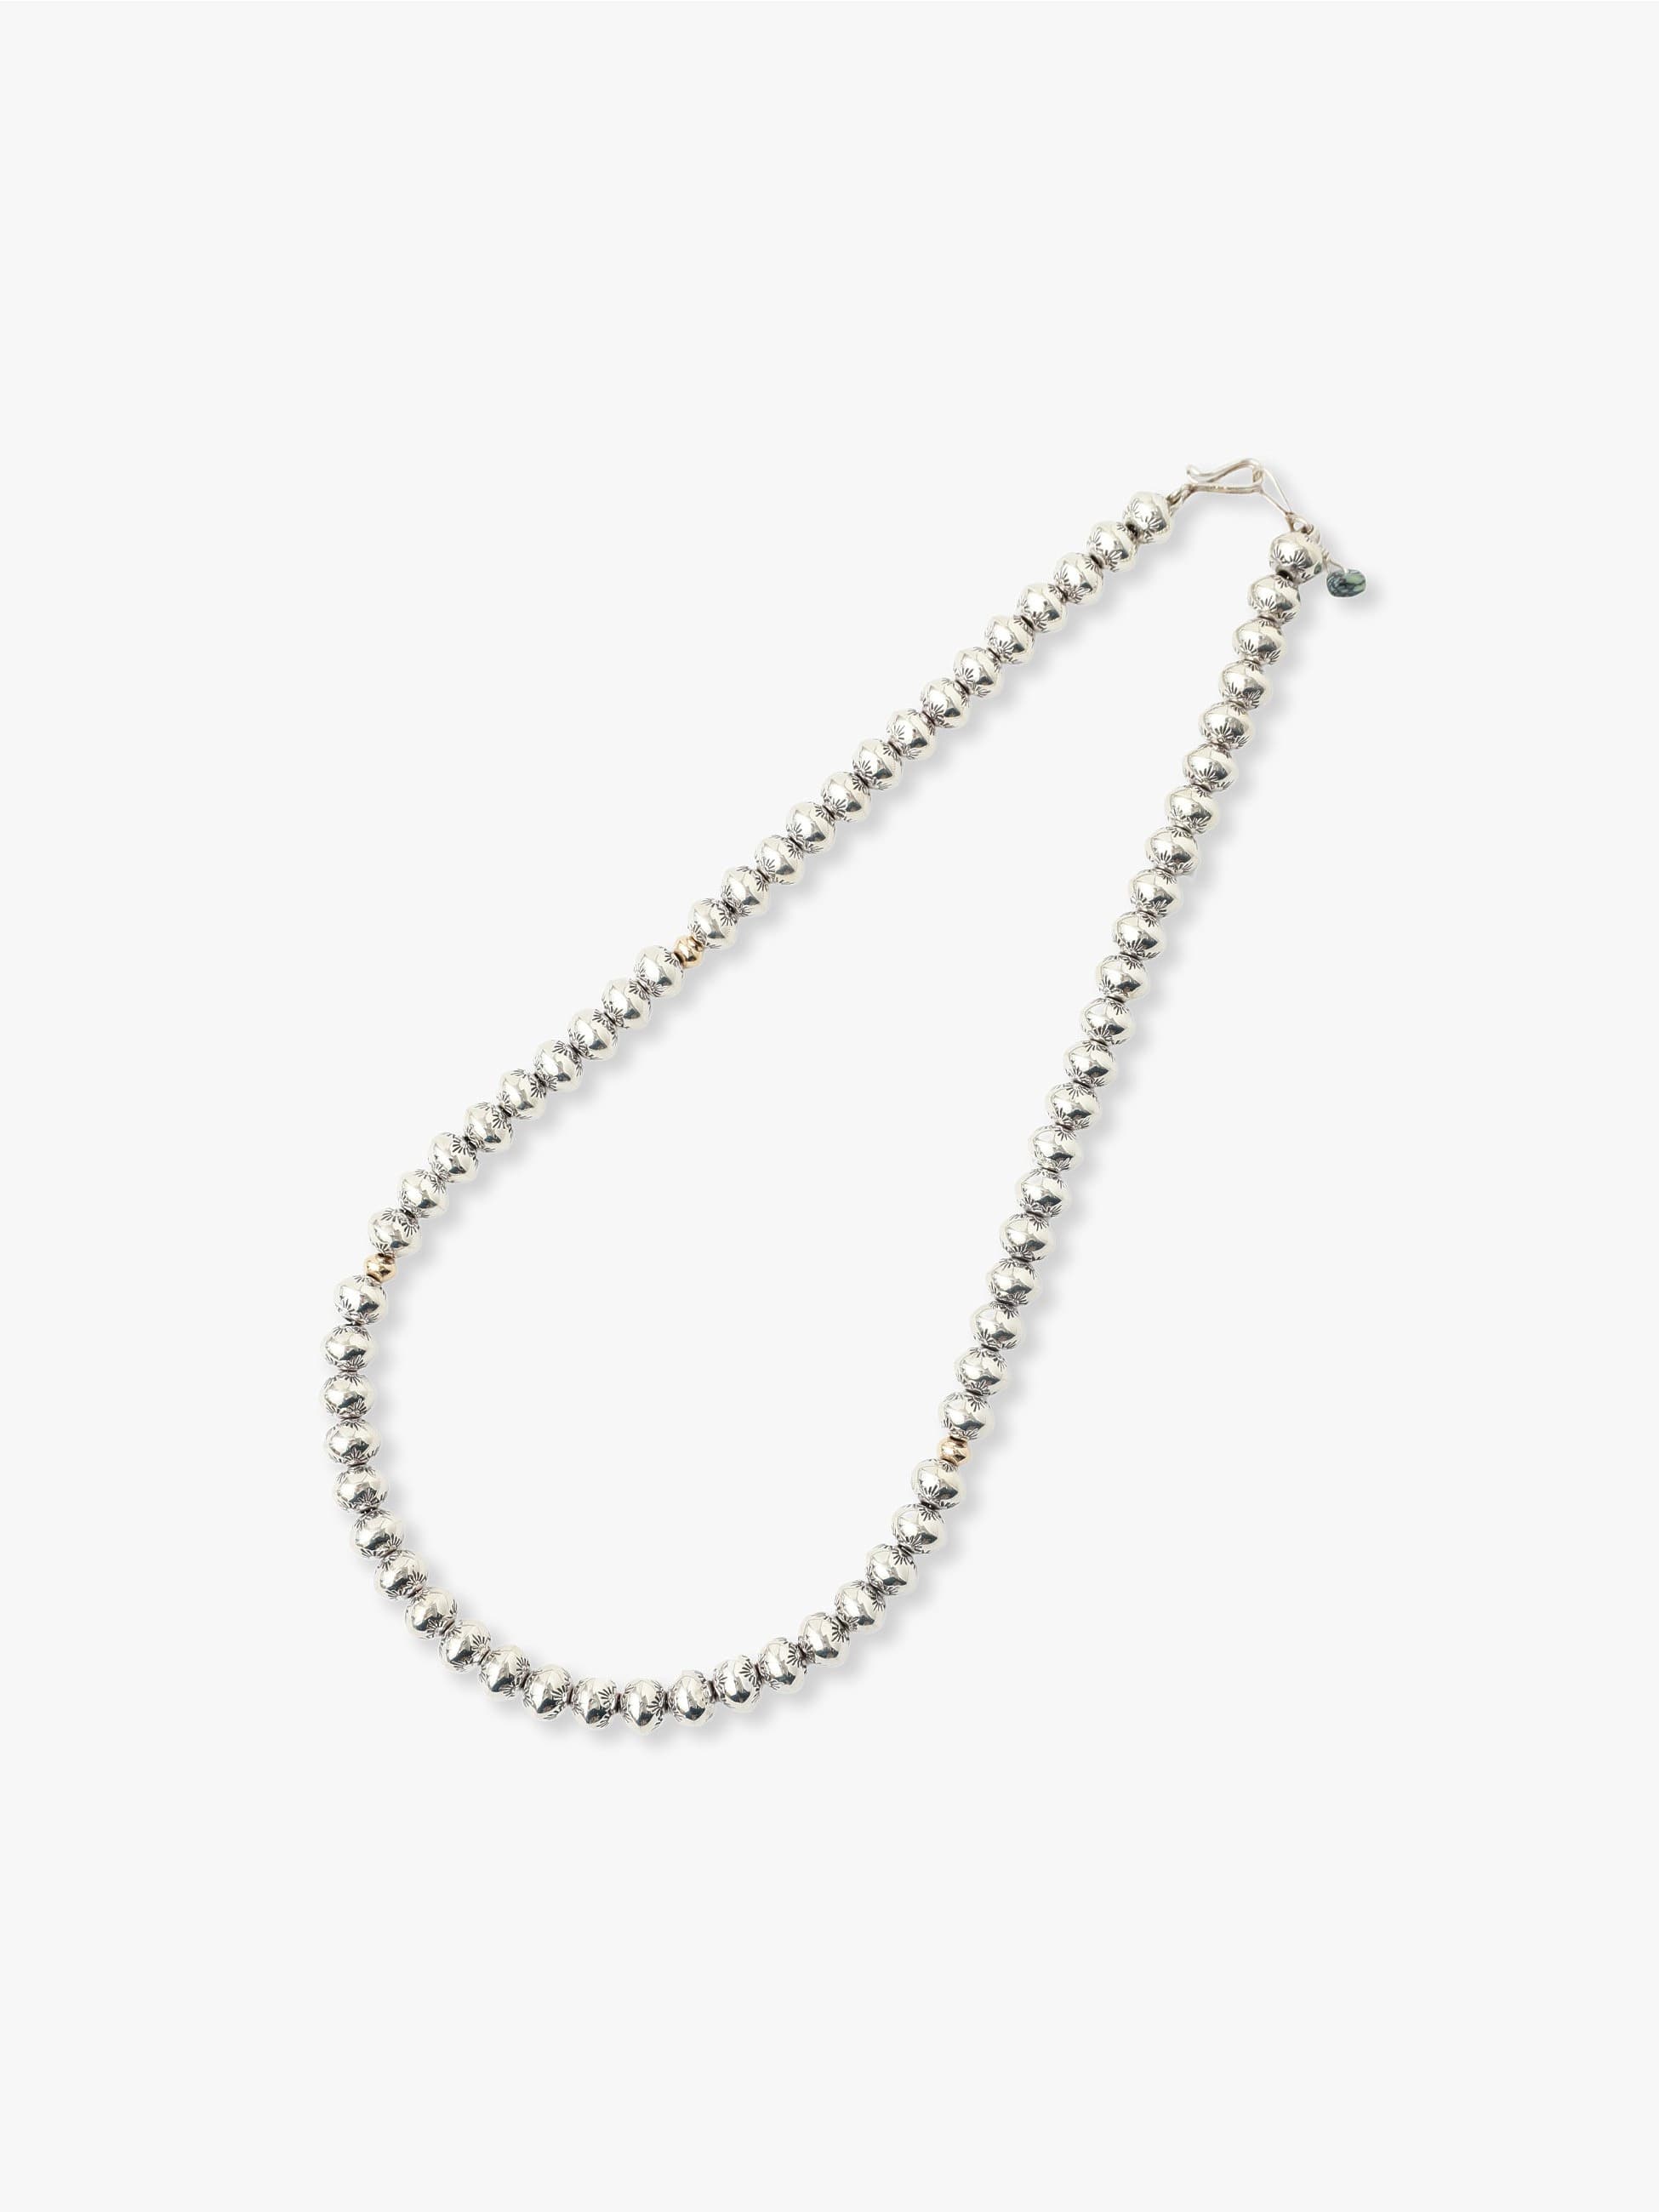 Silver Beads Necklace (54cm)